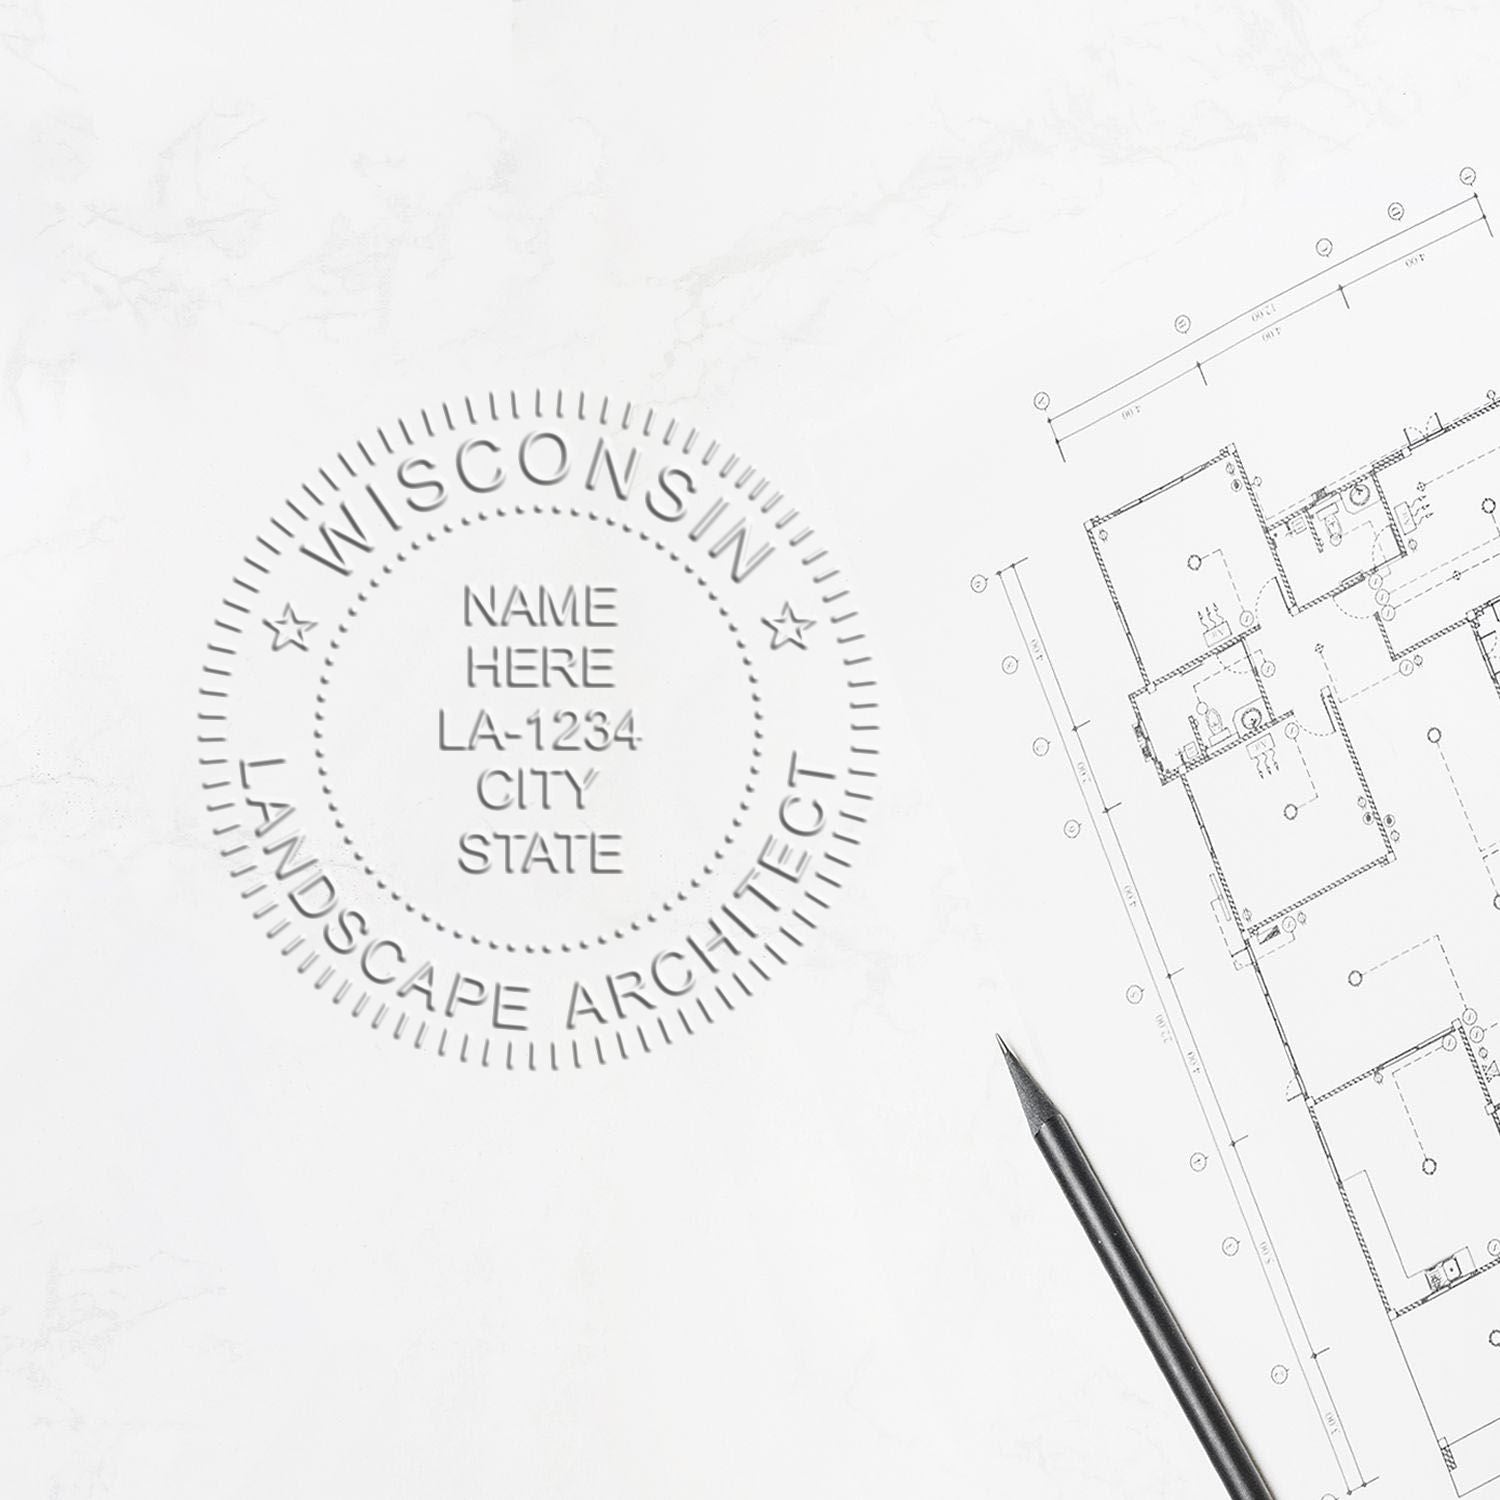 An alternative view of the Gift Wisconsin Landscape Architect Seal stamped on a sheet of paper showing the image in use